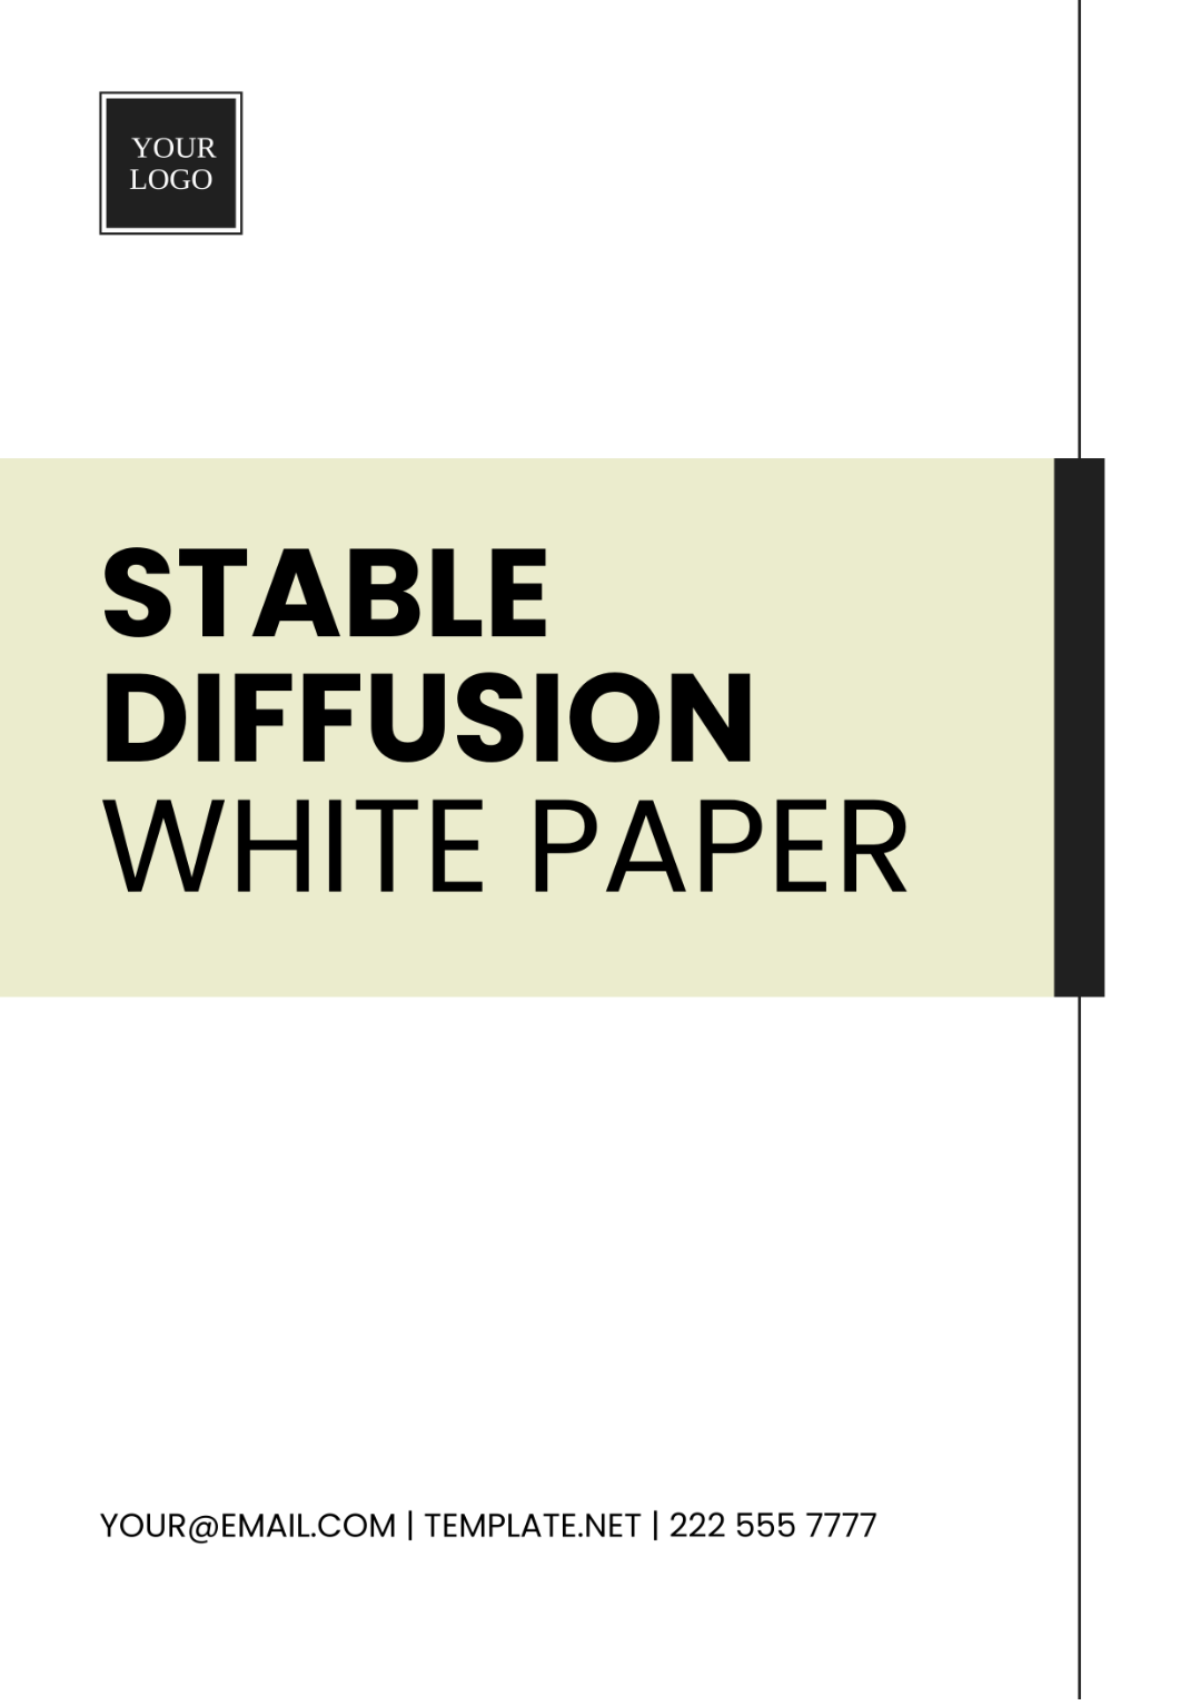 Stable Diffusion White Paper Template